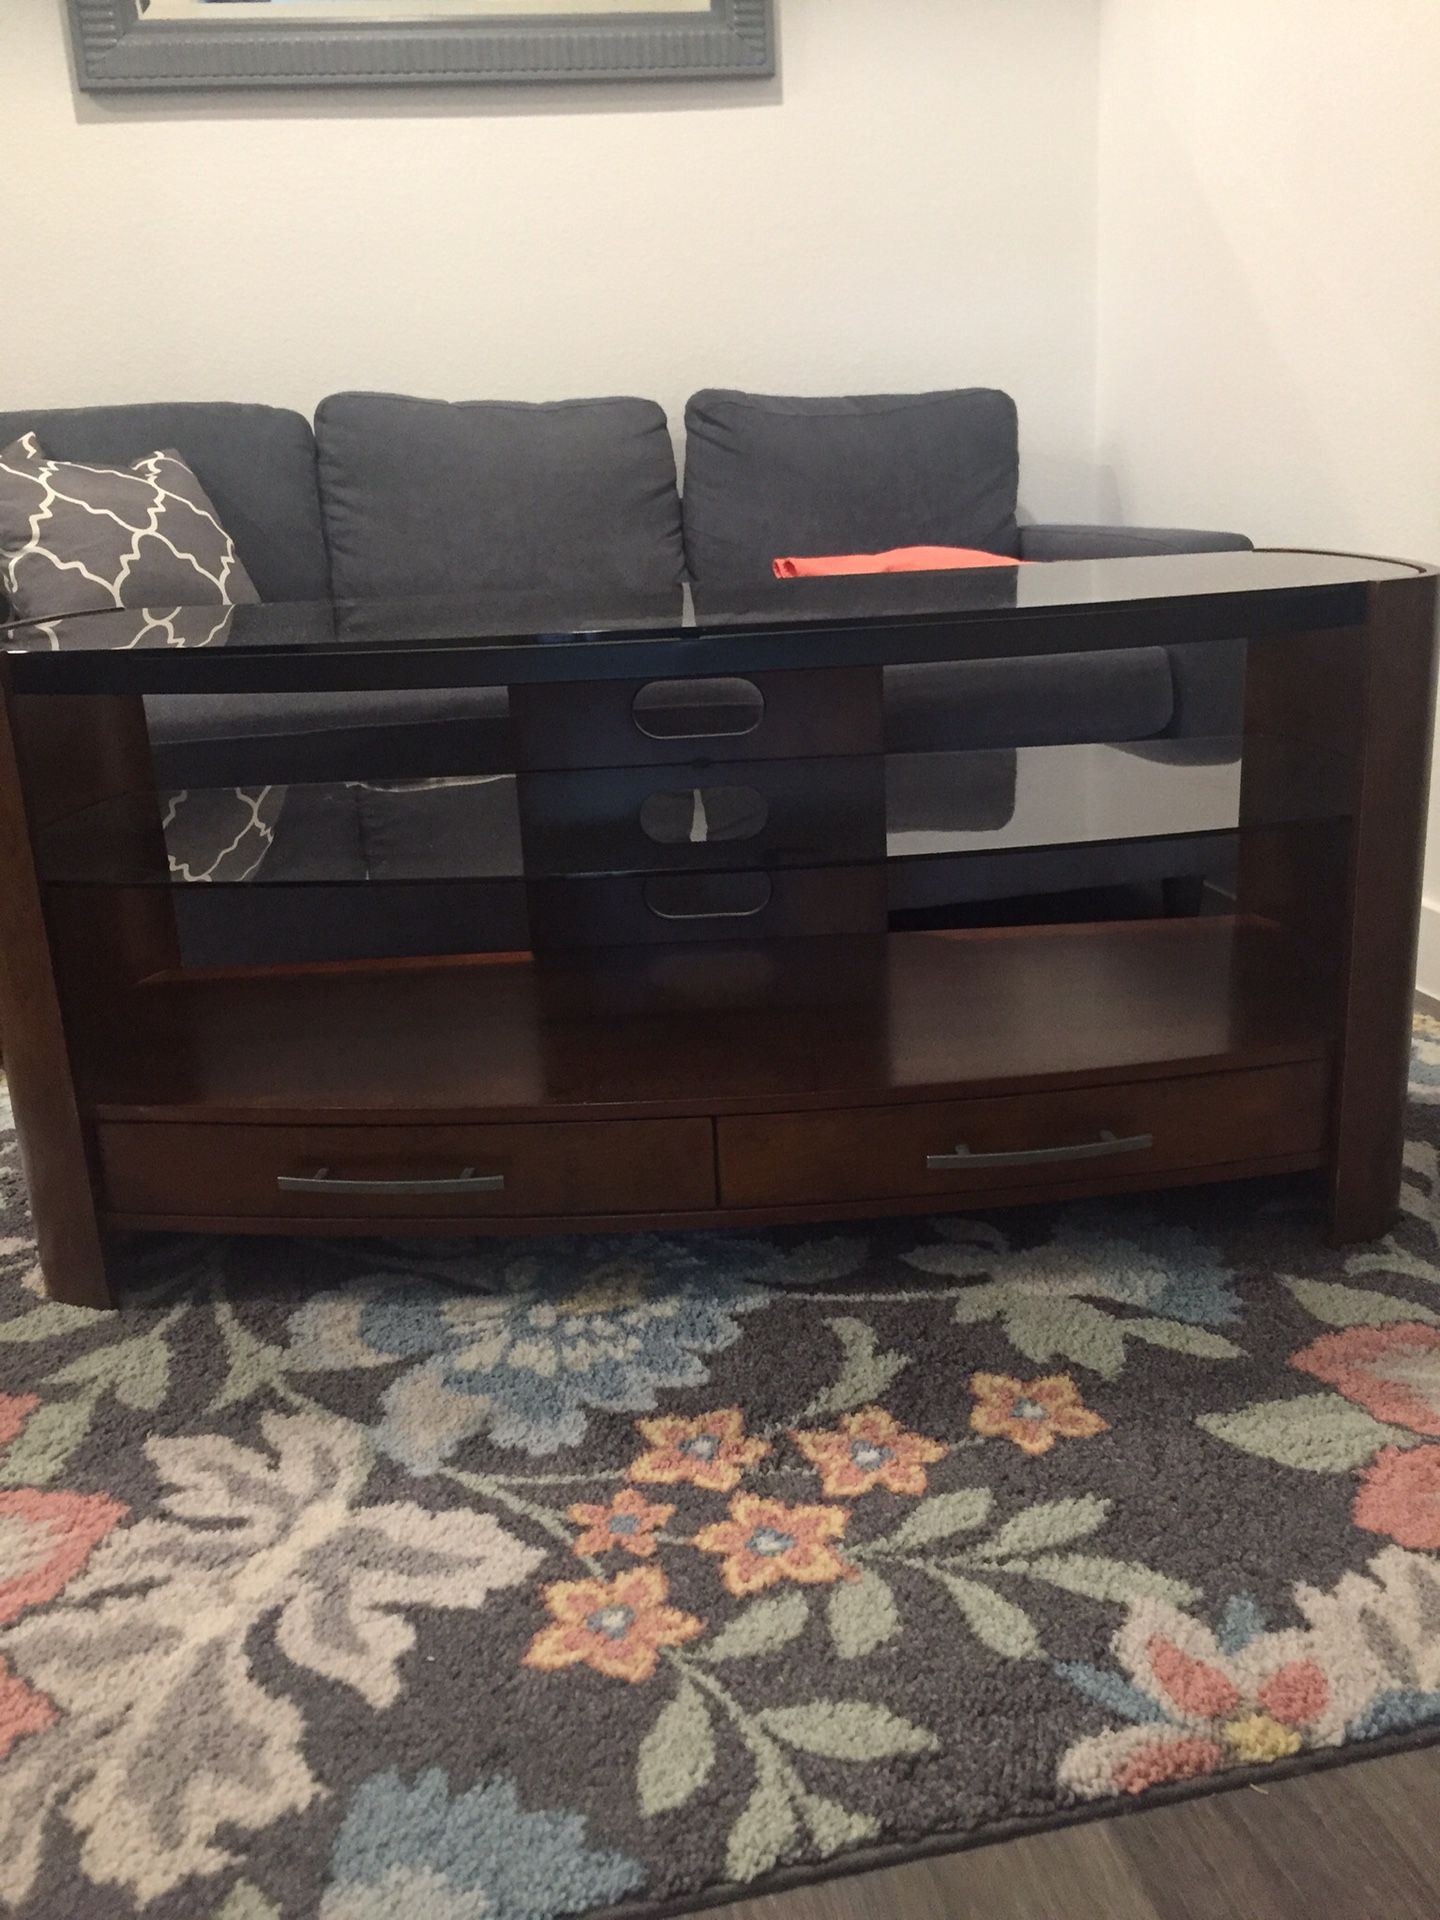 FREE TV stand with shelves and drawers. 50 inches long